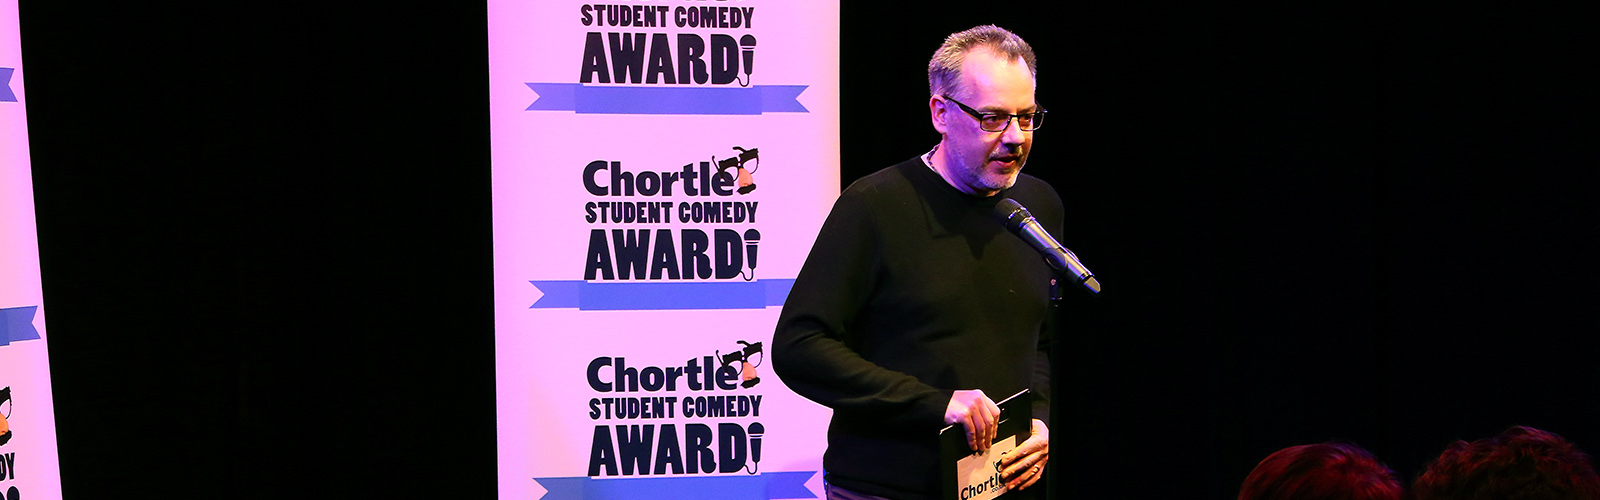 Steve Bennett, manager of chortle hosting on the main stage in front of two flats with the 'Chortle Student Comedy Awards' logos on